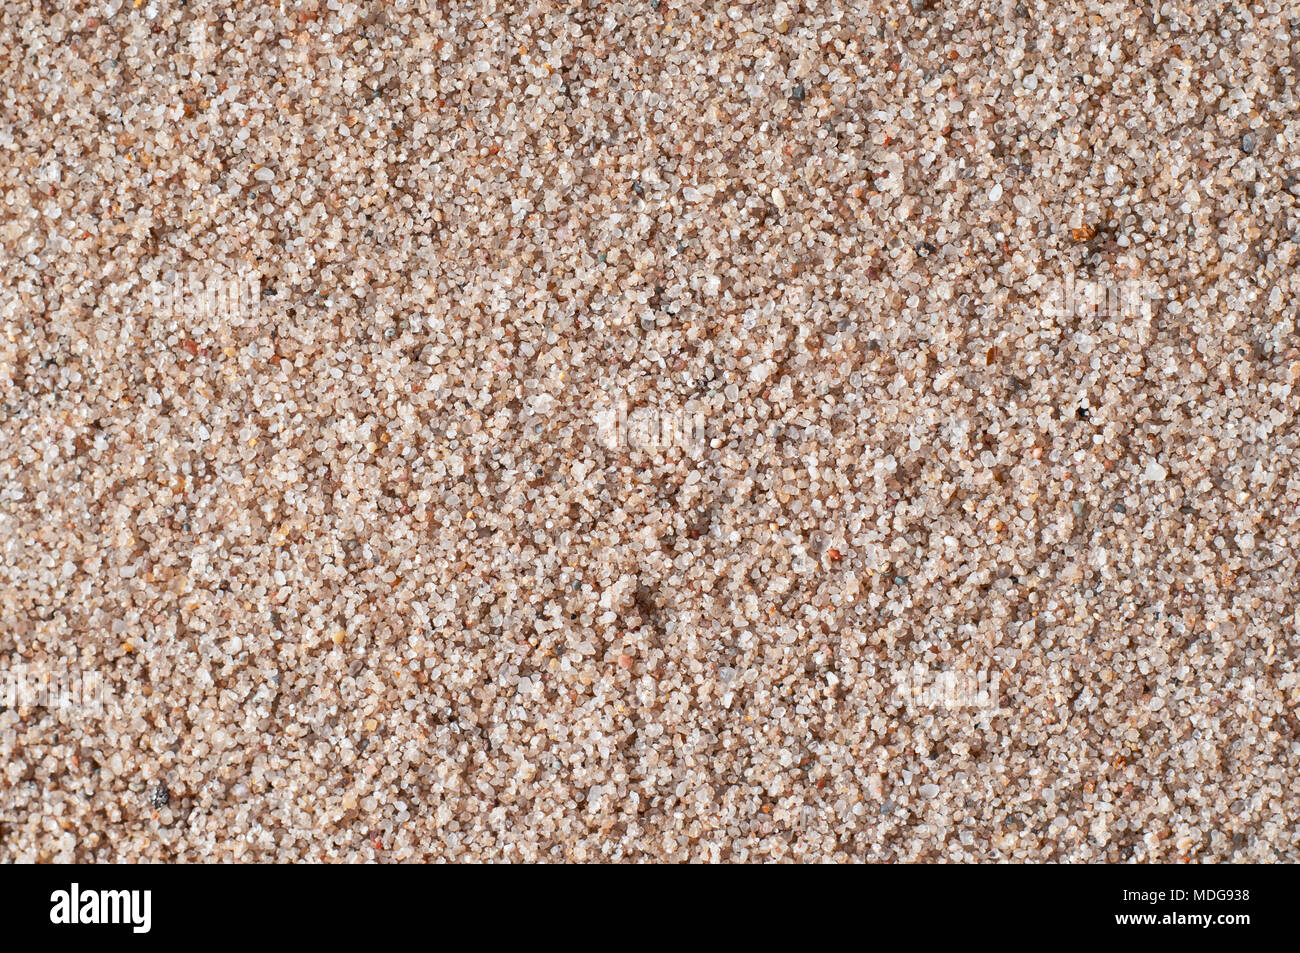 Golden sand background. Closeup with gritty texture Stock Photo